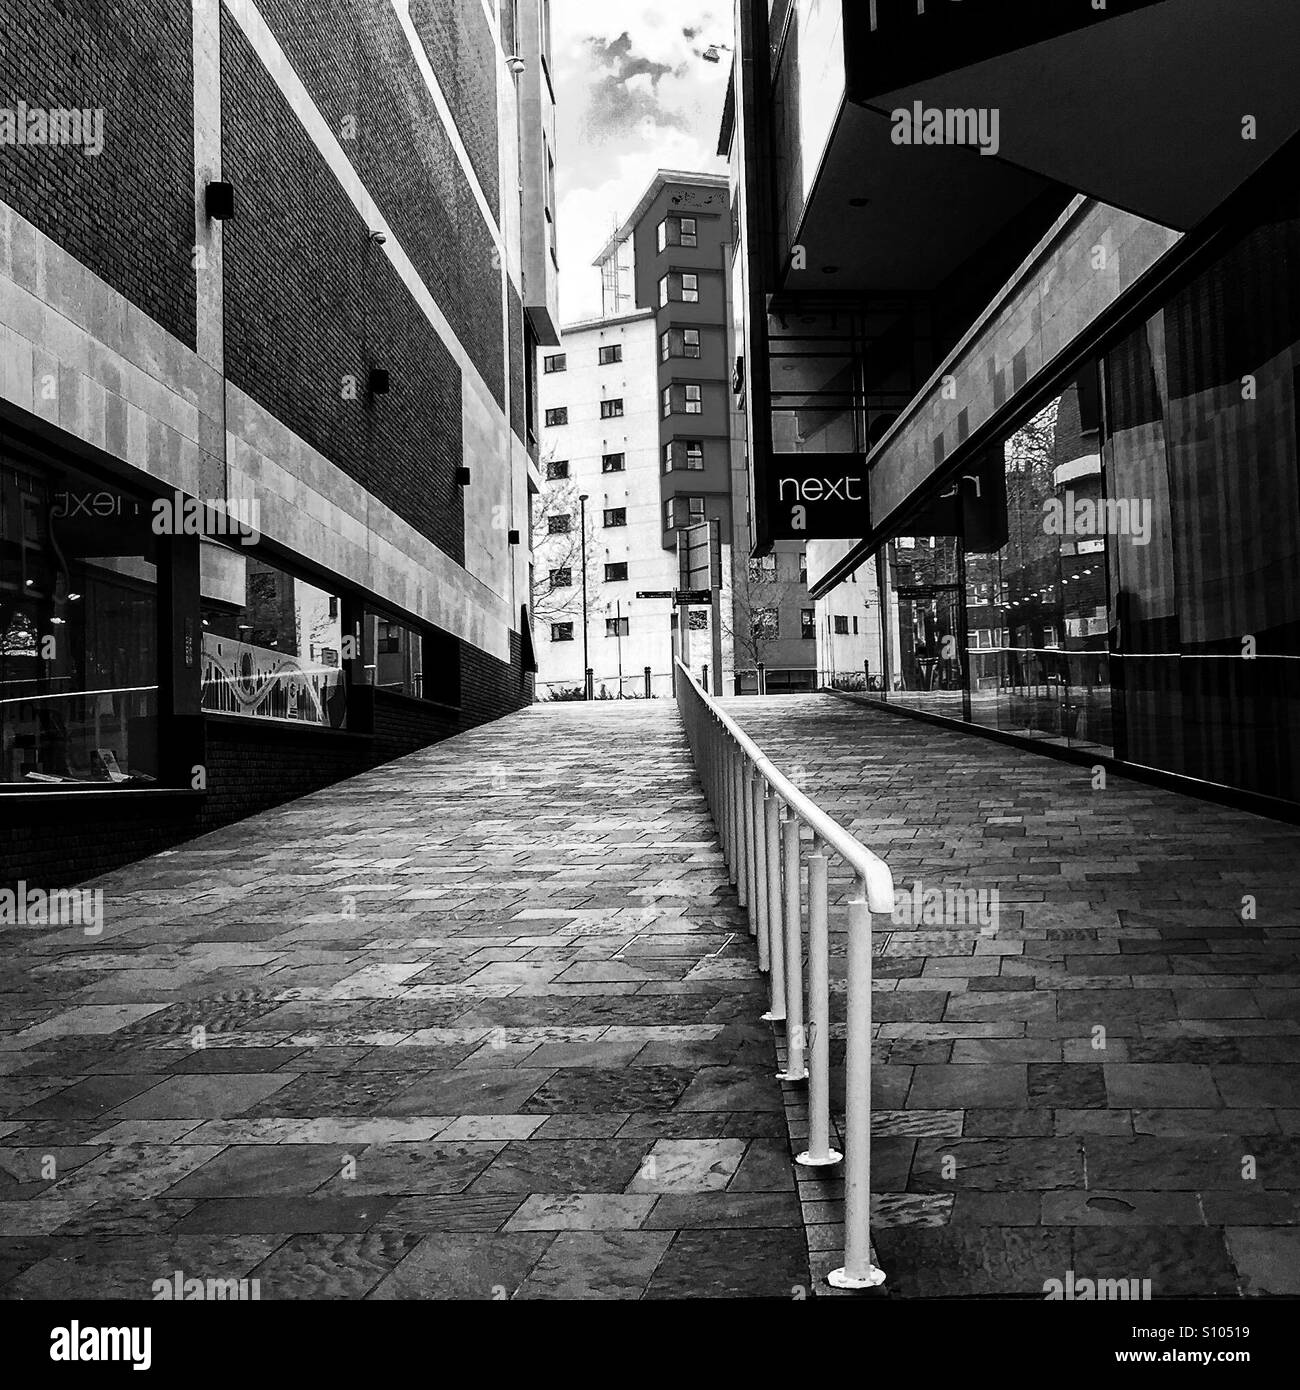 A pedestrian shopping walkway with handrail. Shot in black and white and showing a central vanishing point. The scene is empty, prior to shop opening. Stock Photo